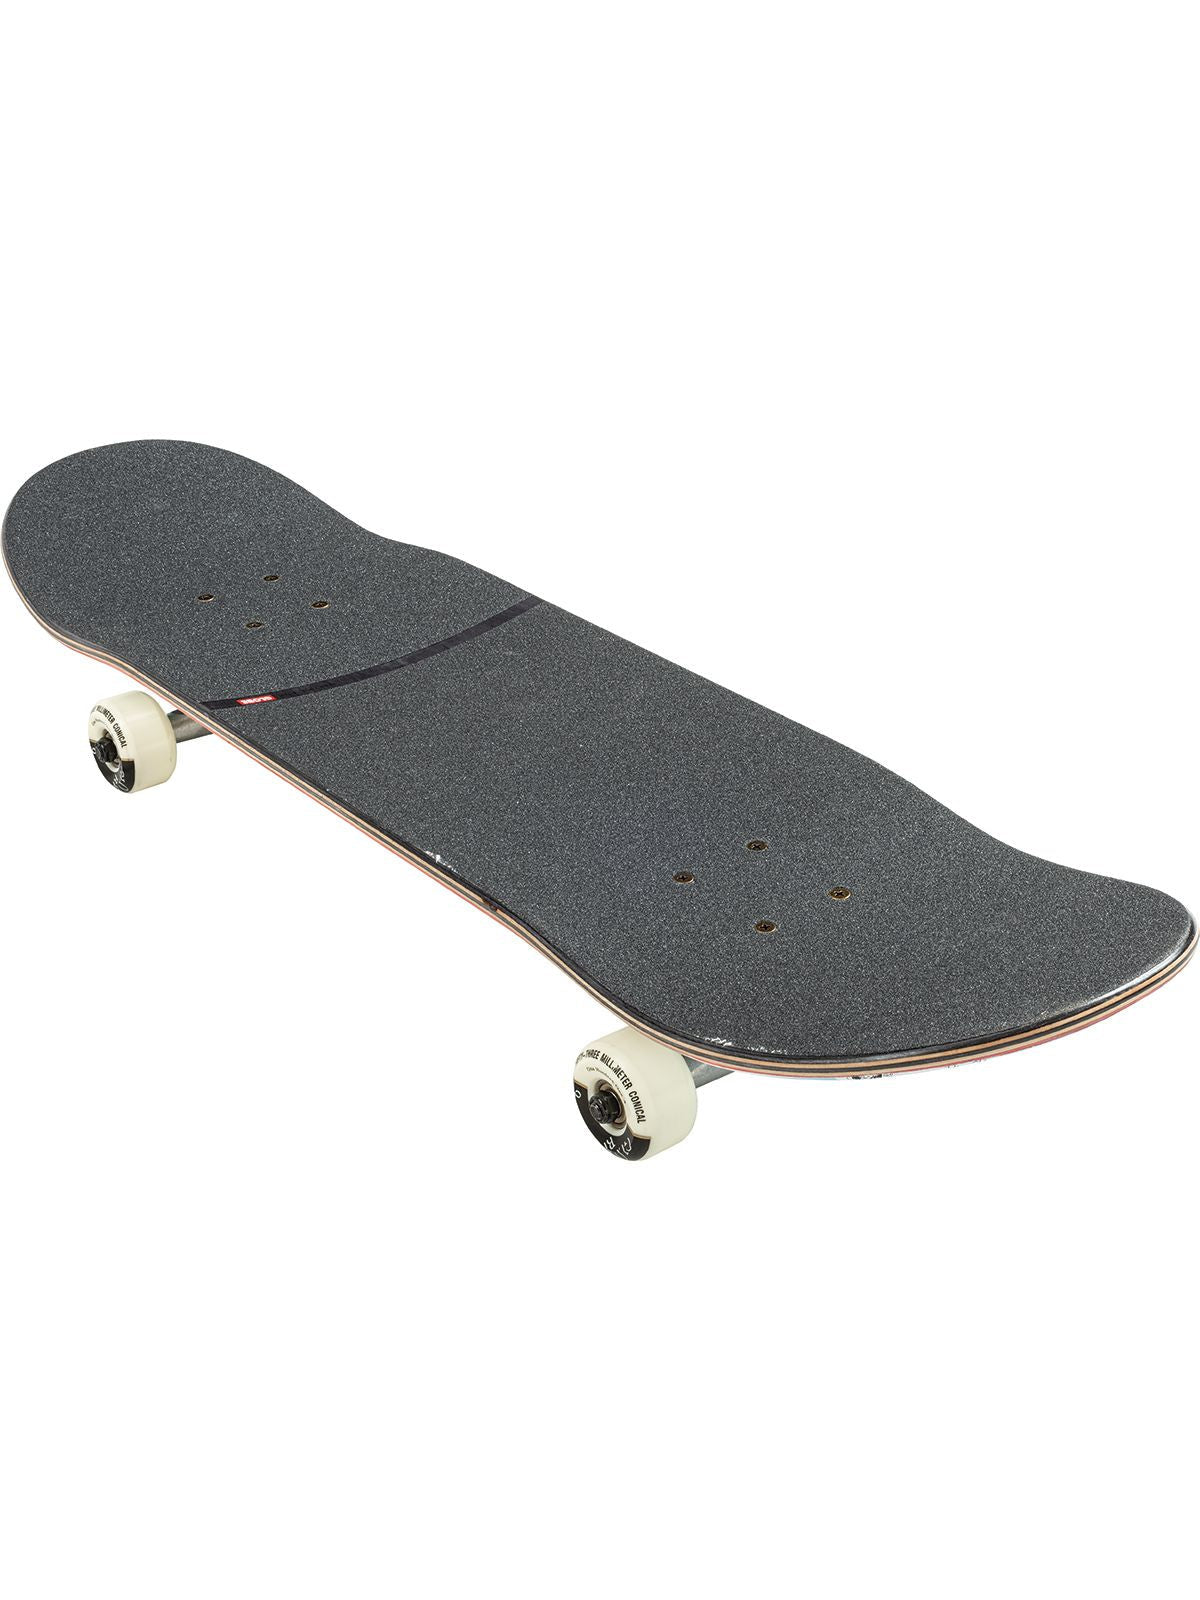 G2 Sprawl 8.125 inch Skateboard Complete - Disappearing Trees